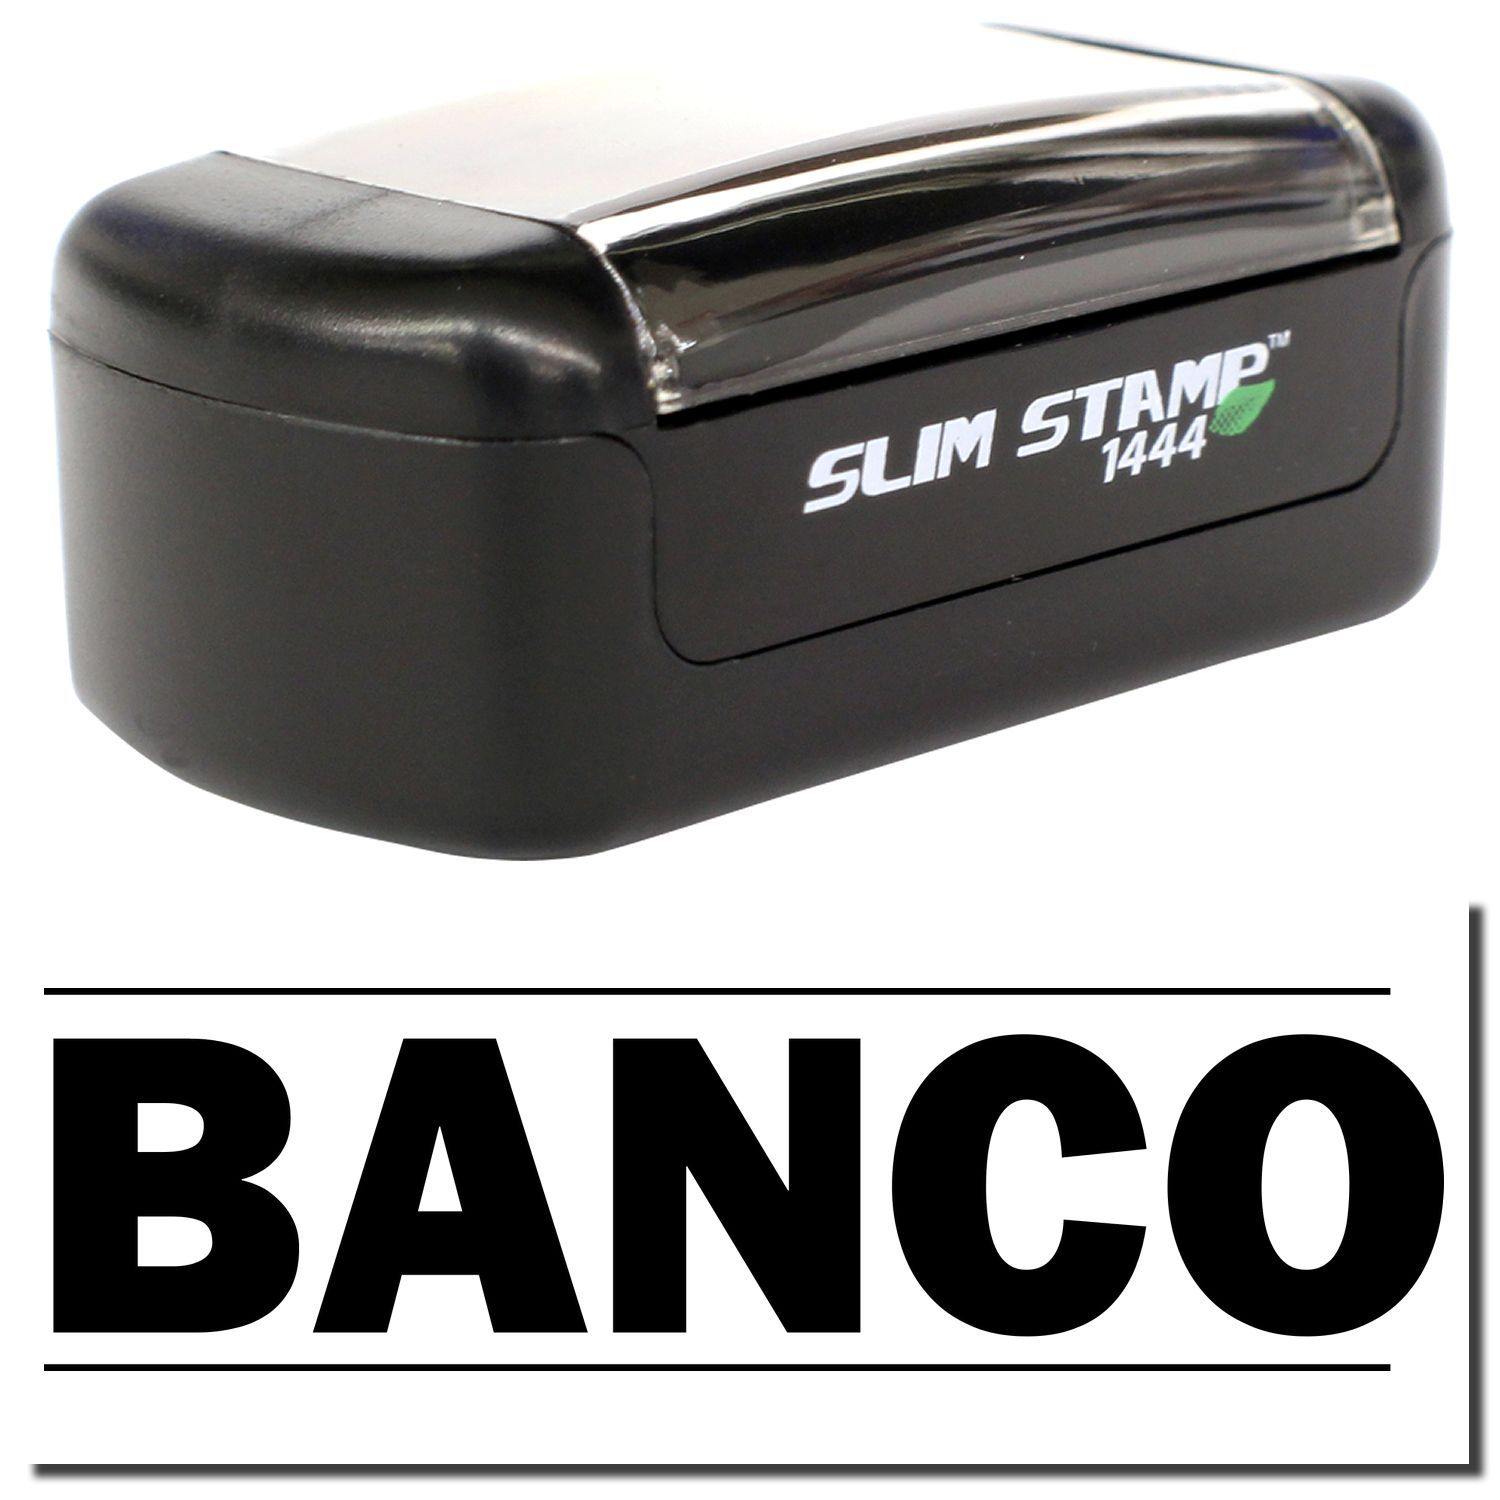 A stock office pre-inked stamp with a stamped image showing how the text "BANCO" in bold font with a line both above and below the text is displayed after stamping.